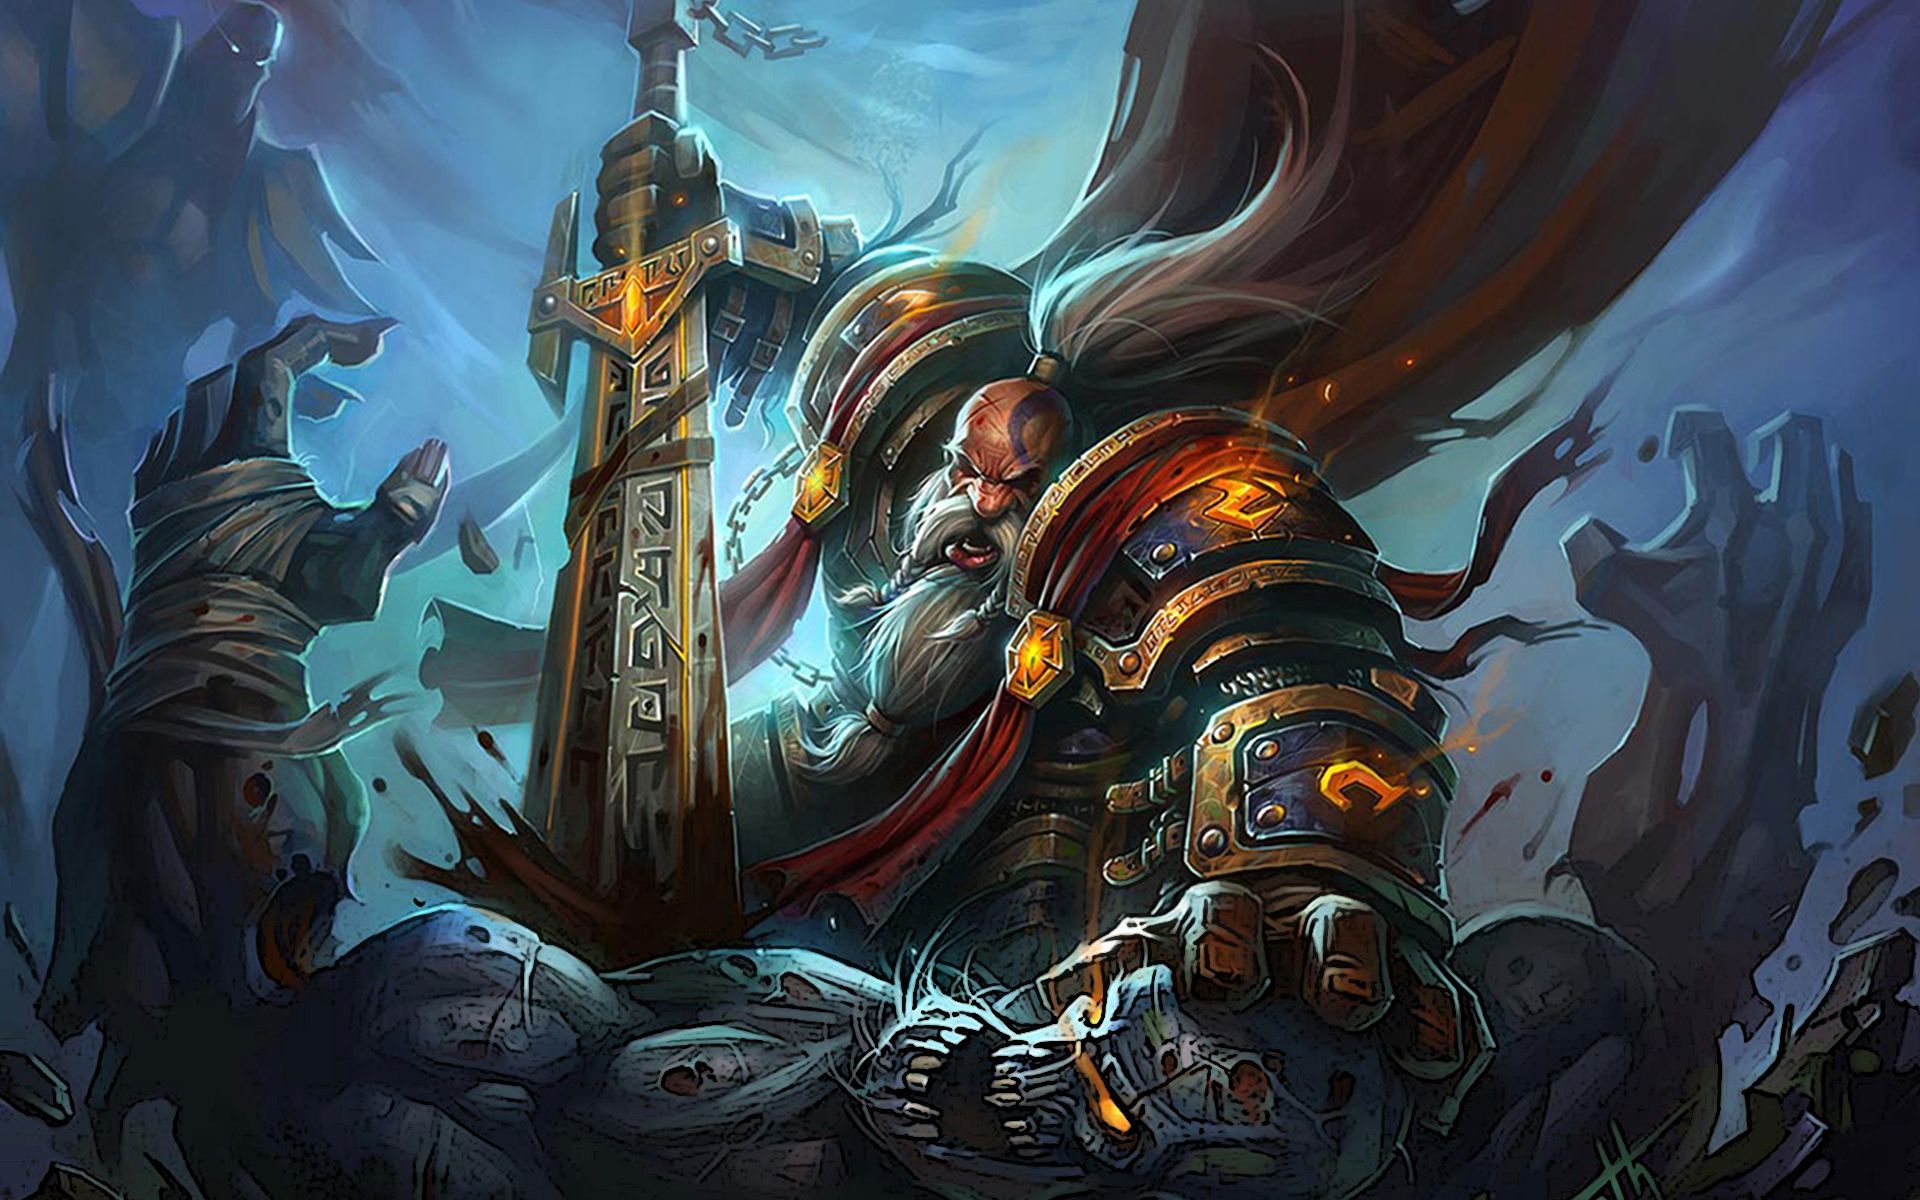 World Of Warcraft Wallpaper Dota 2 and E Sports Geeks Dota 2 and other